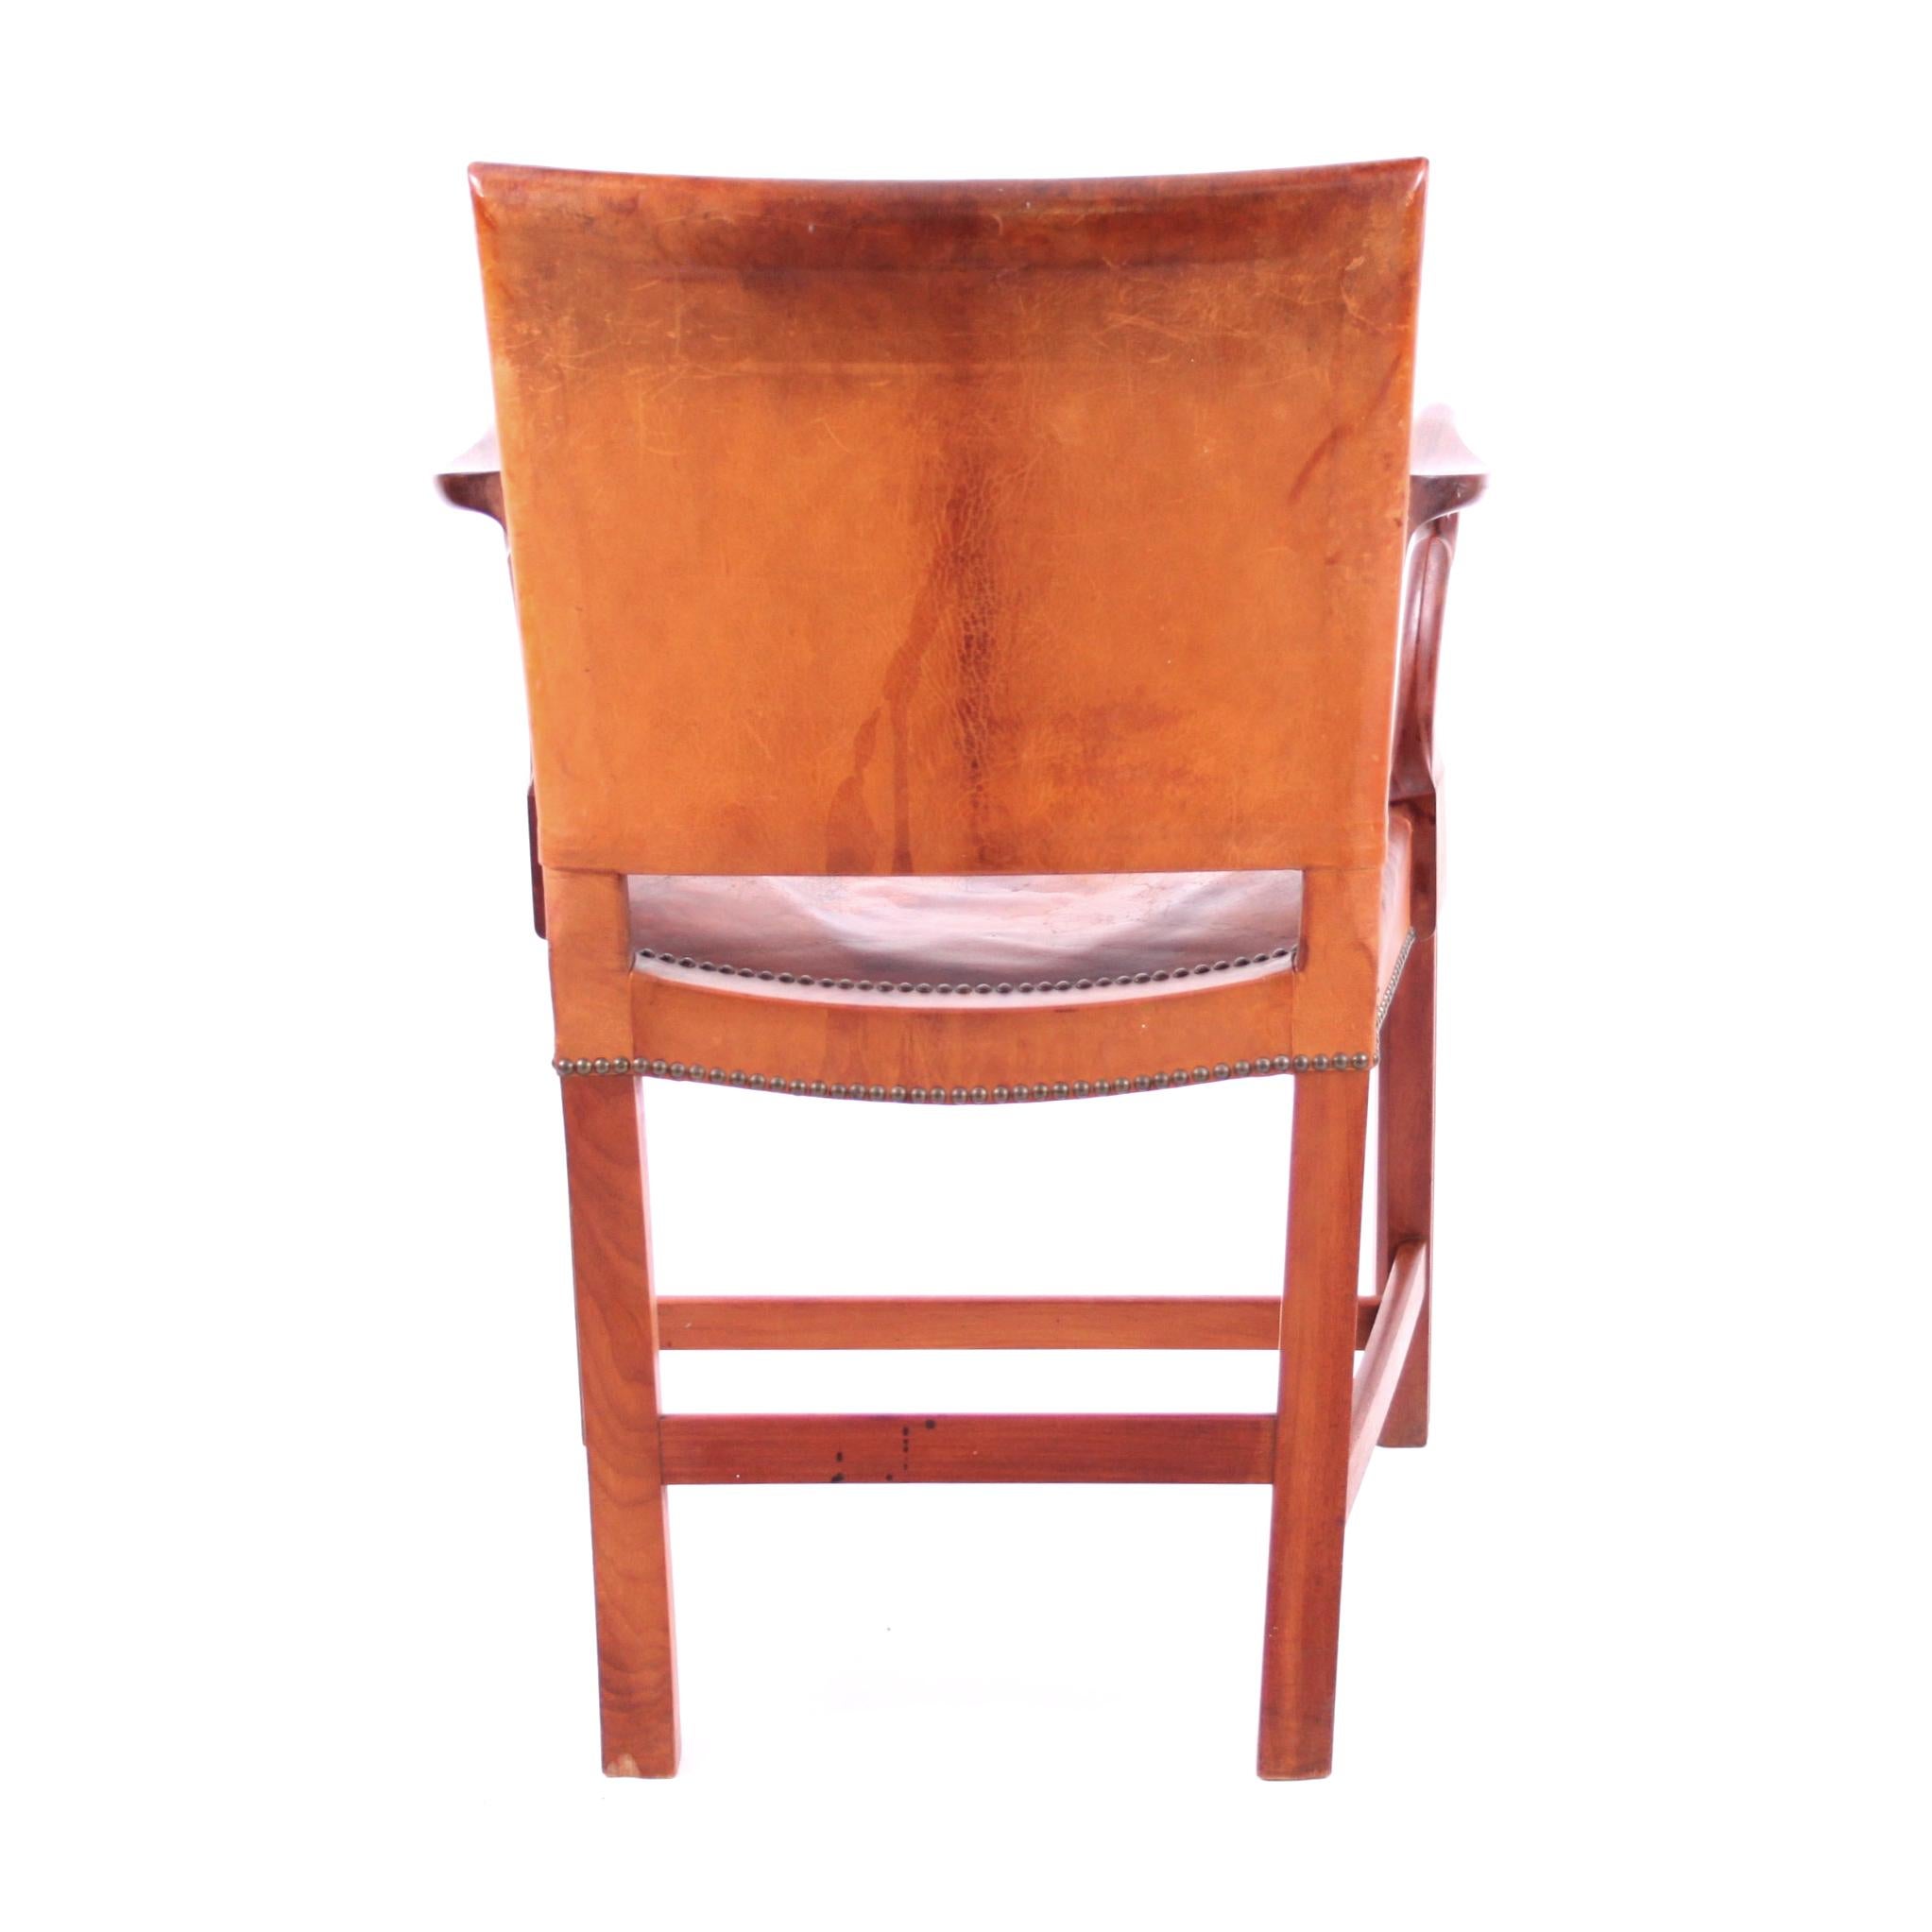 Danish Kaare Klint and Ole Wanscher, Rare Armchair in Niger Leather and Mahogany Frame